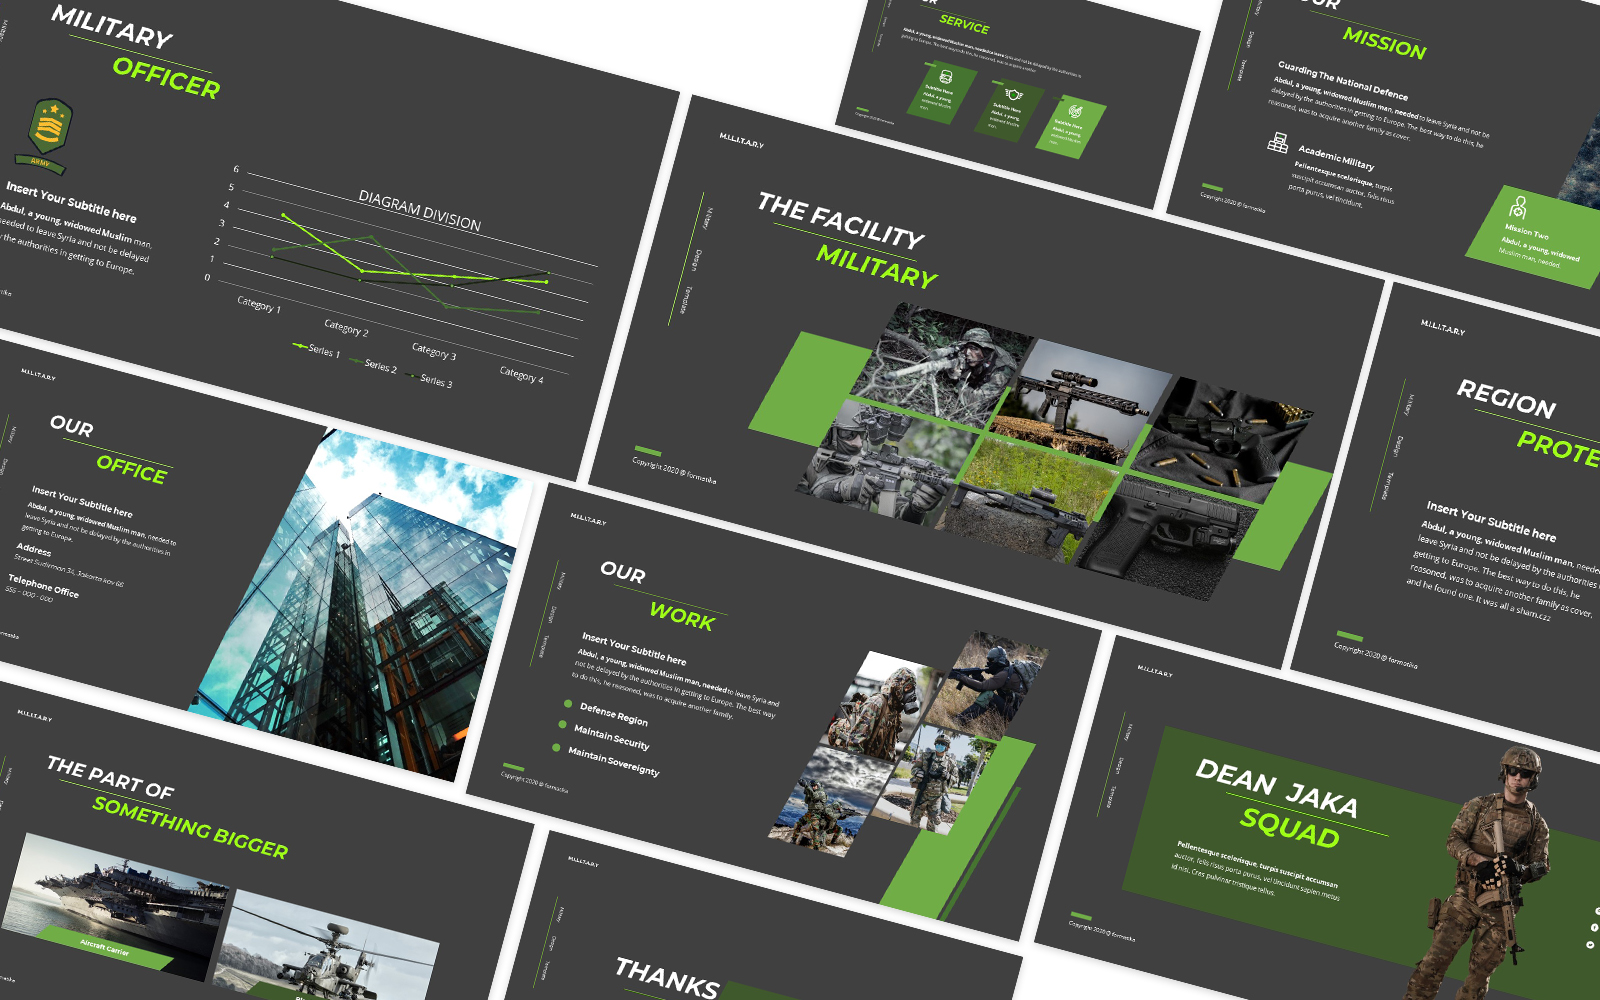 Dean Jaka Military Powerpoint Template